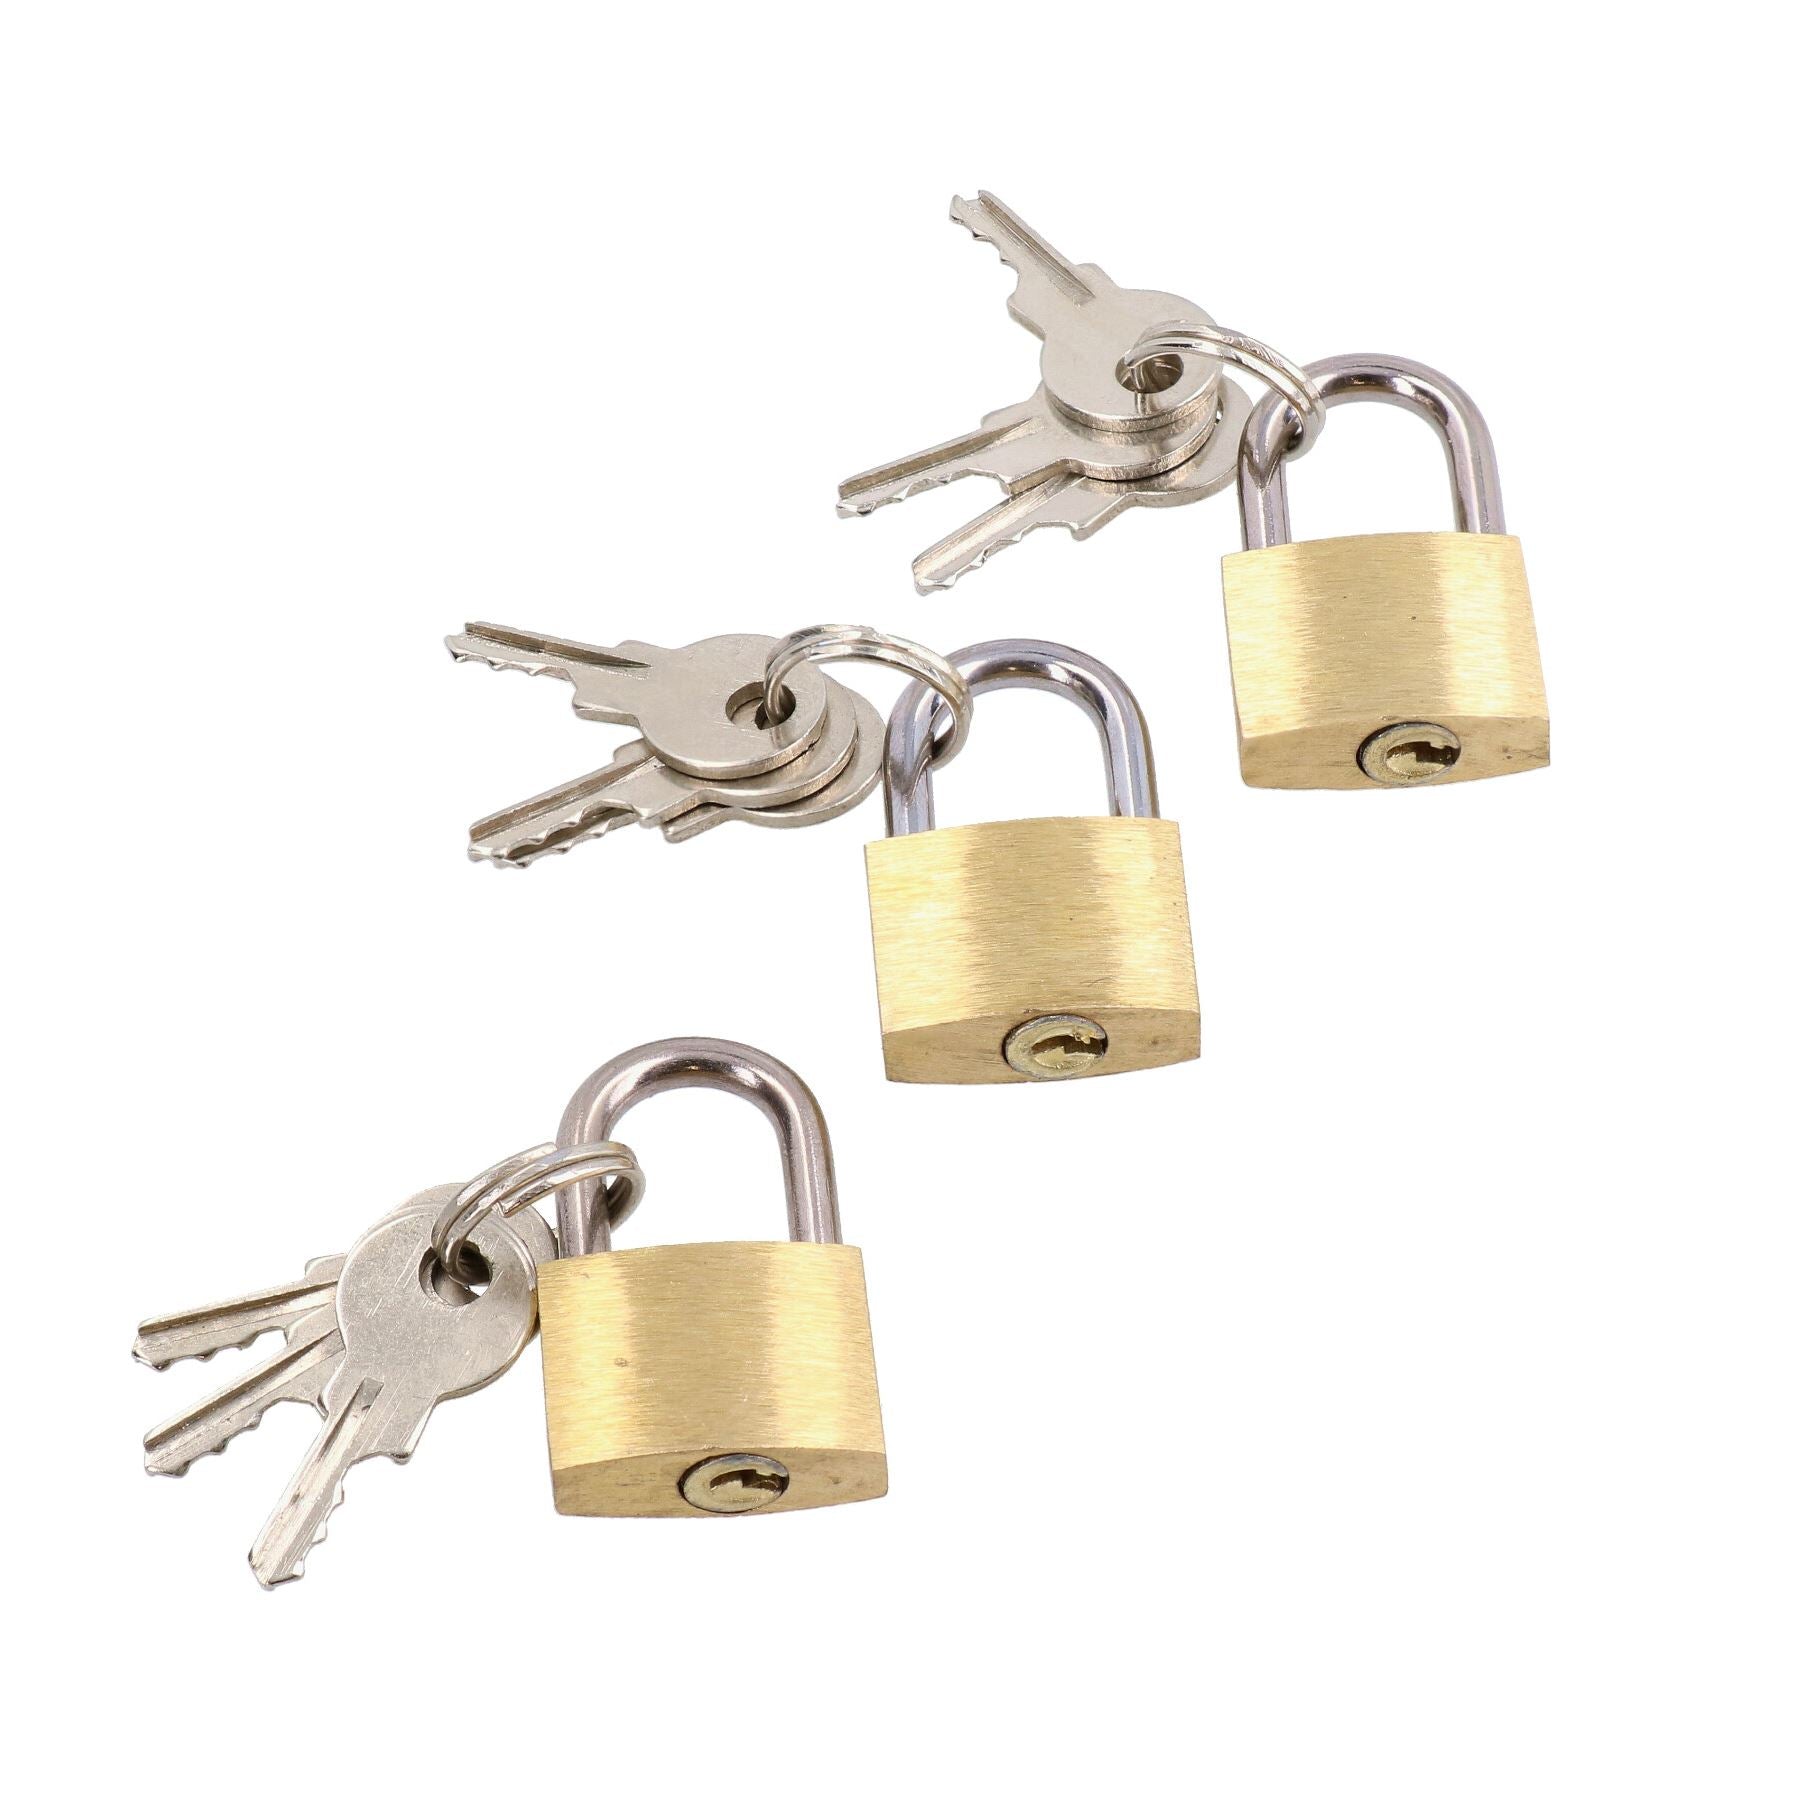 20mm Mini Brass Padlock Set for Suitcases Luggage Rucksacks Tents with Keys